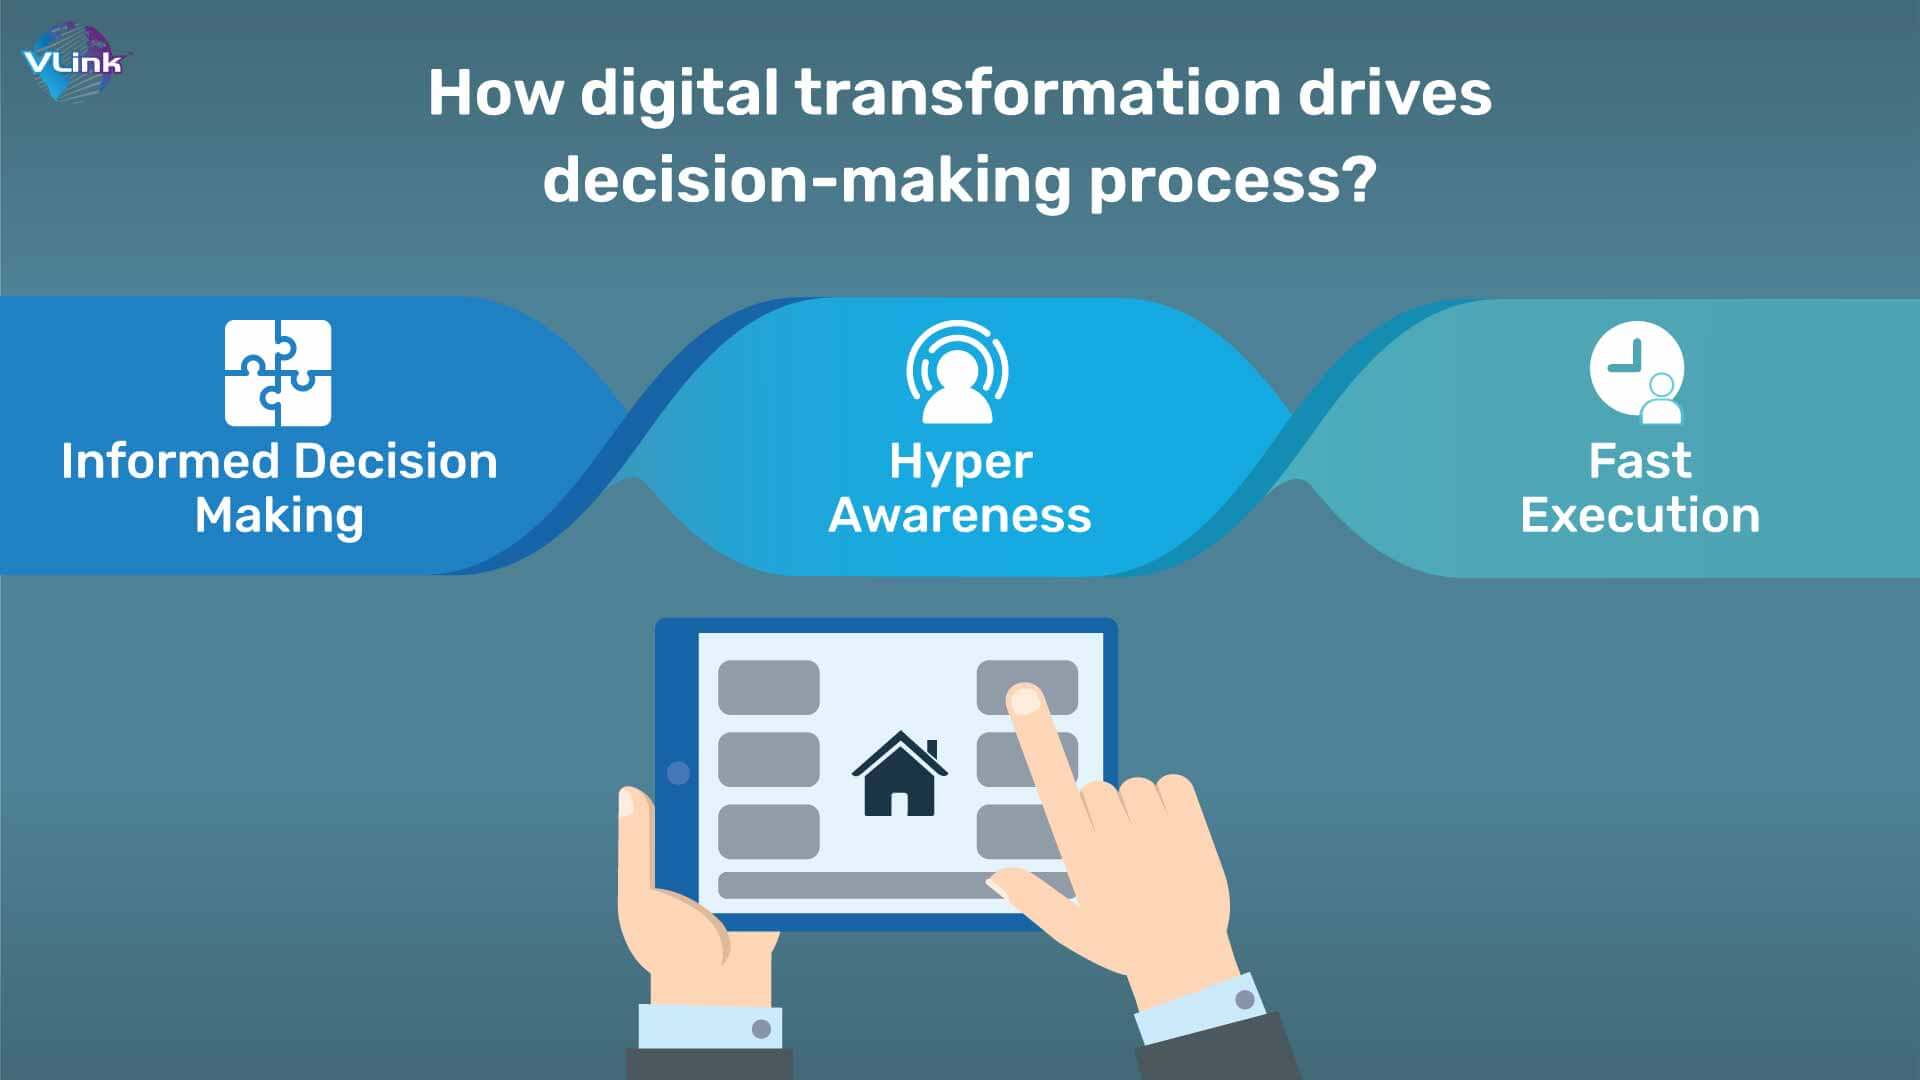 How digital transformation drives the decision-making process